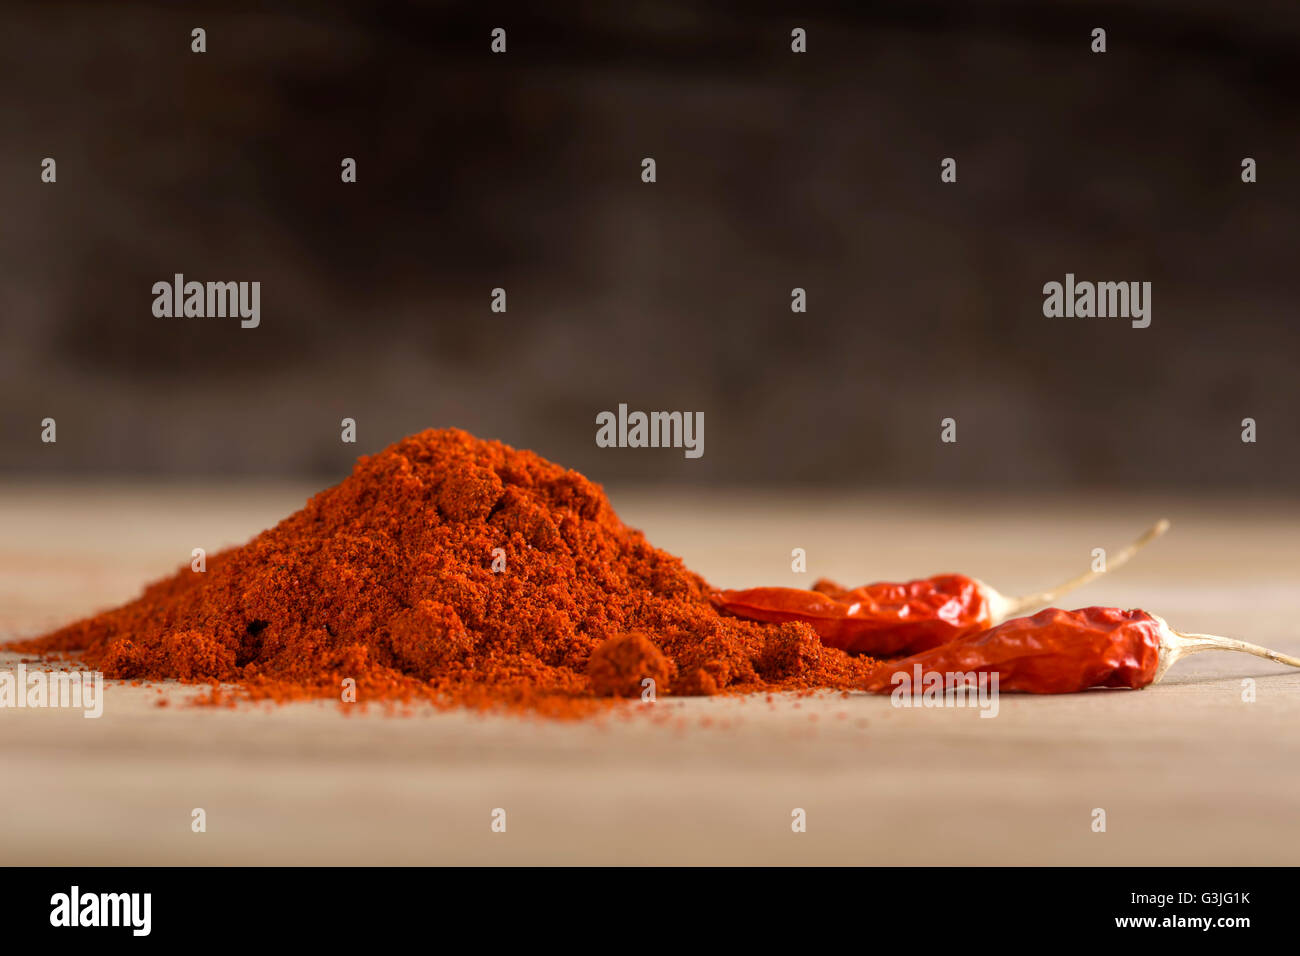 Red hot chili pepper and paprika powder over wooden background Stock Photo